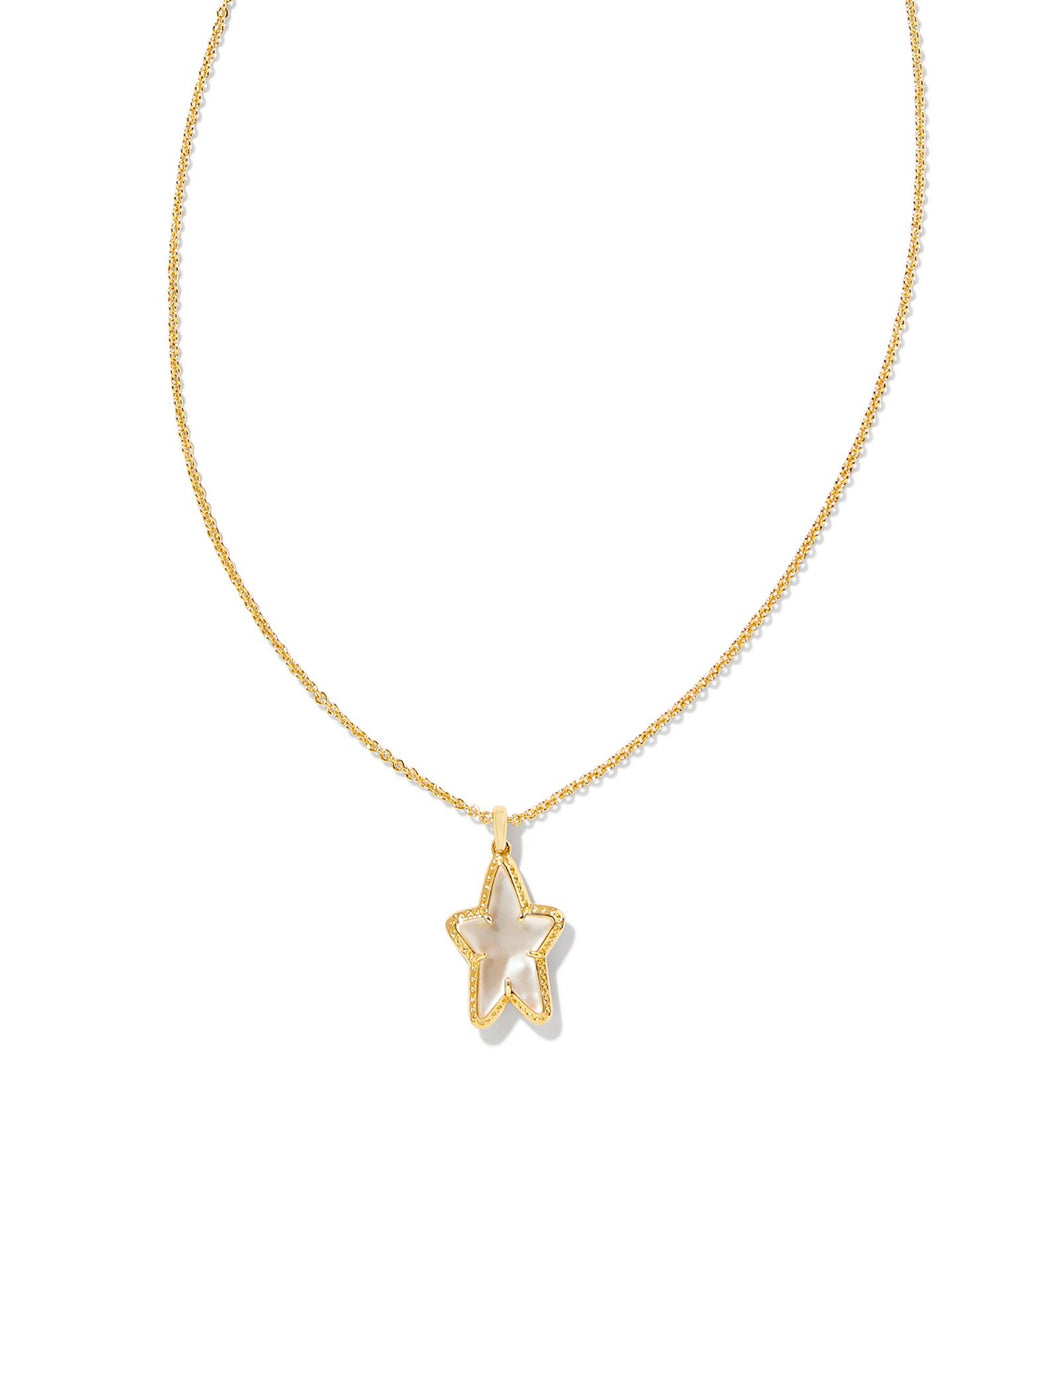 Kendra Scott: Ada Star Short Pendant Necklace in Gold Ivory Mother of Pearl